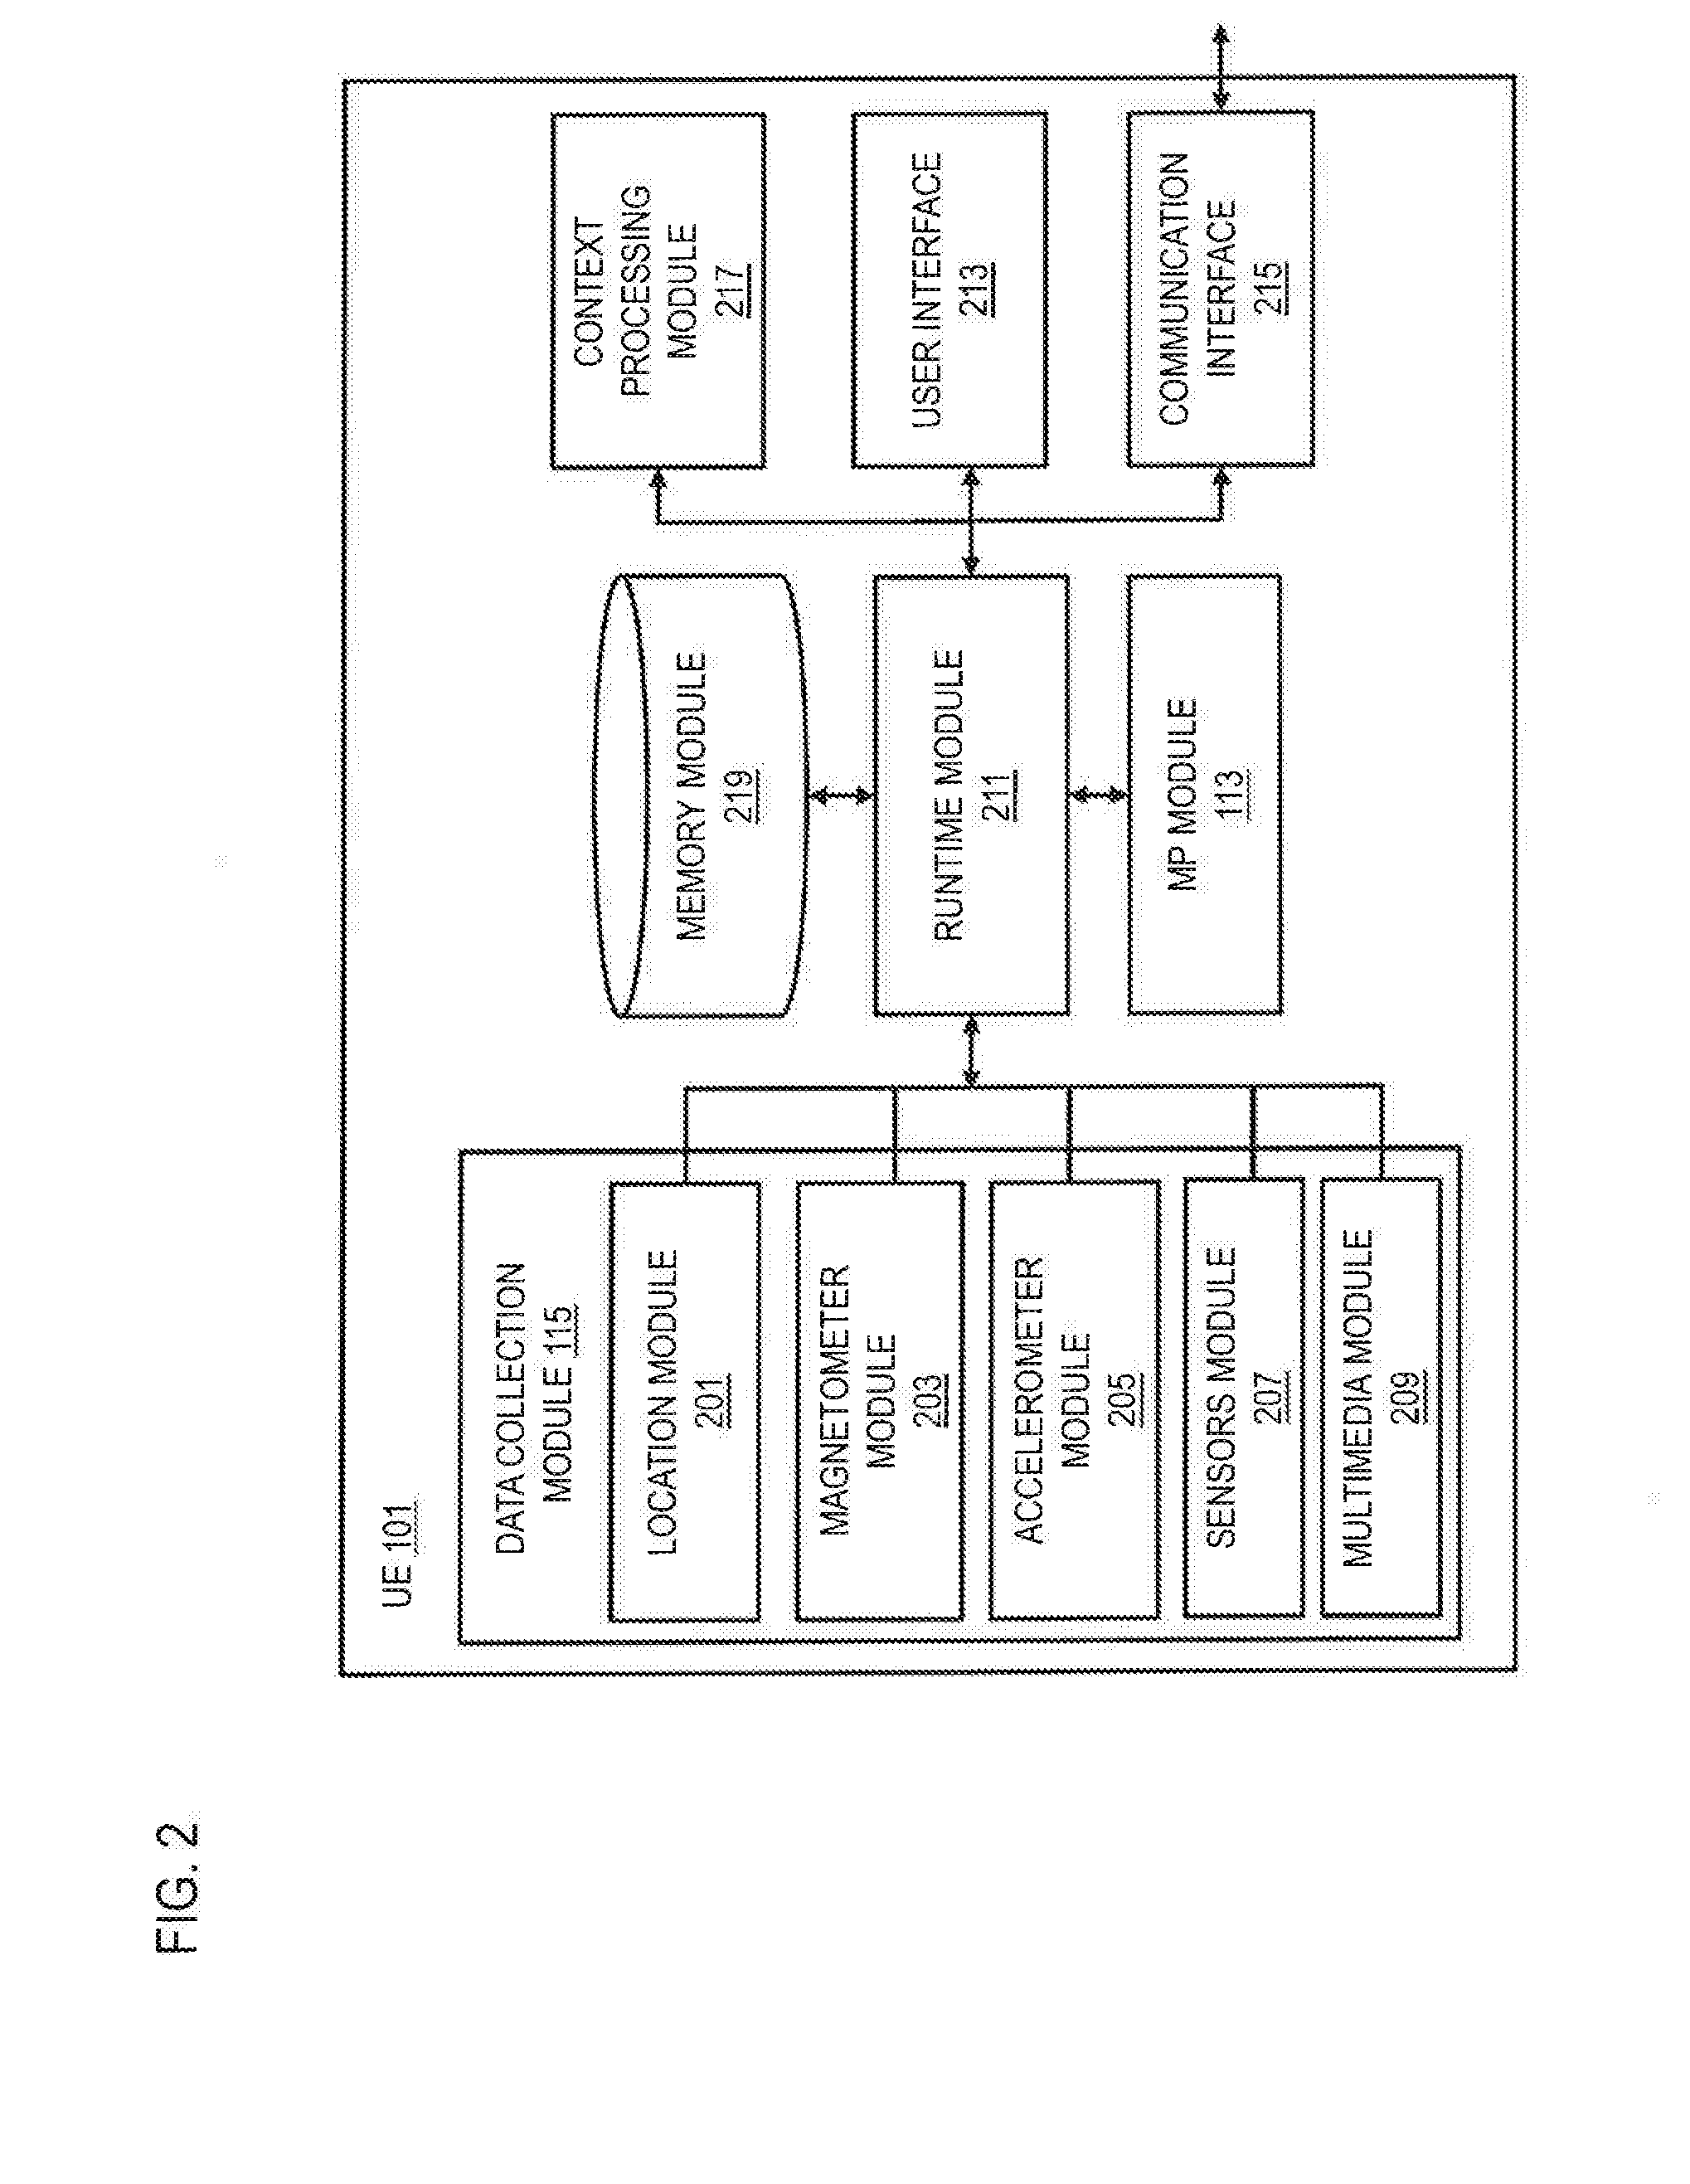 Method and apparatus for visualization of geo-located media contents in 3D rendering applications